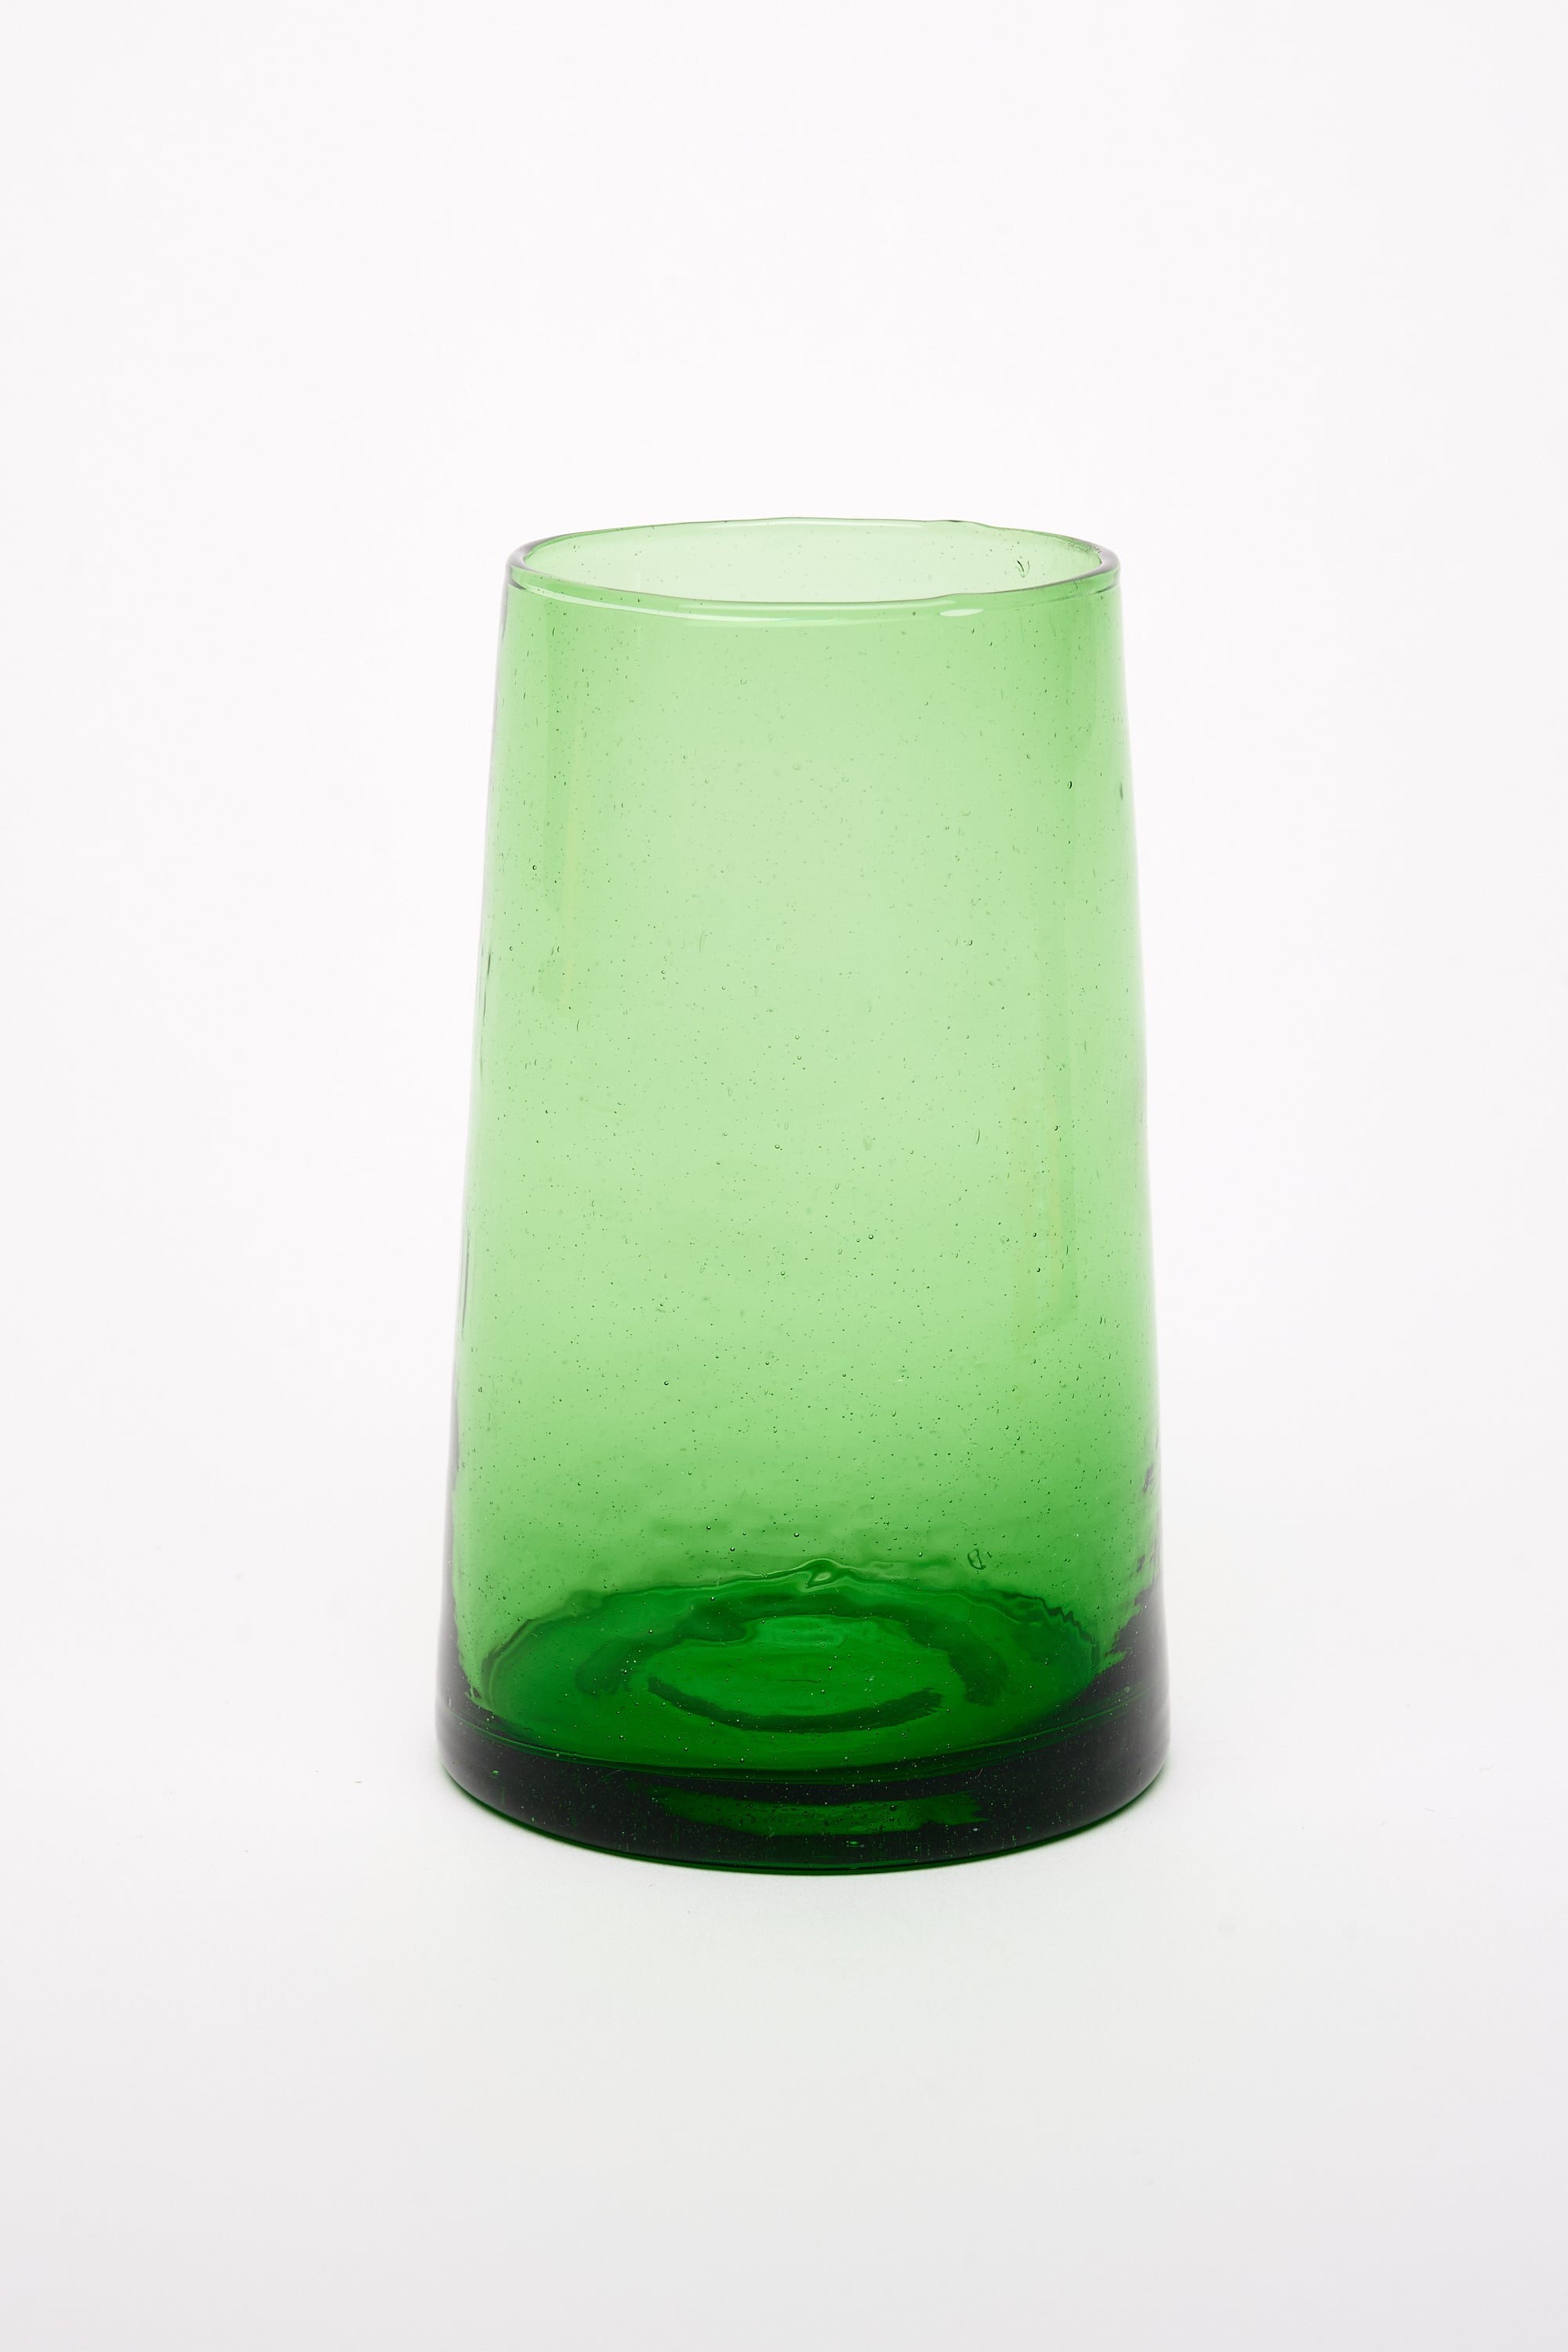 Tall Cone Moroccan Drinking Glasses in Green, SET OF 6